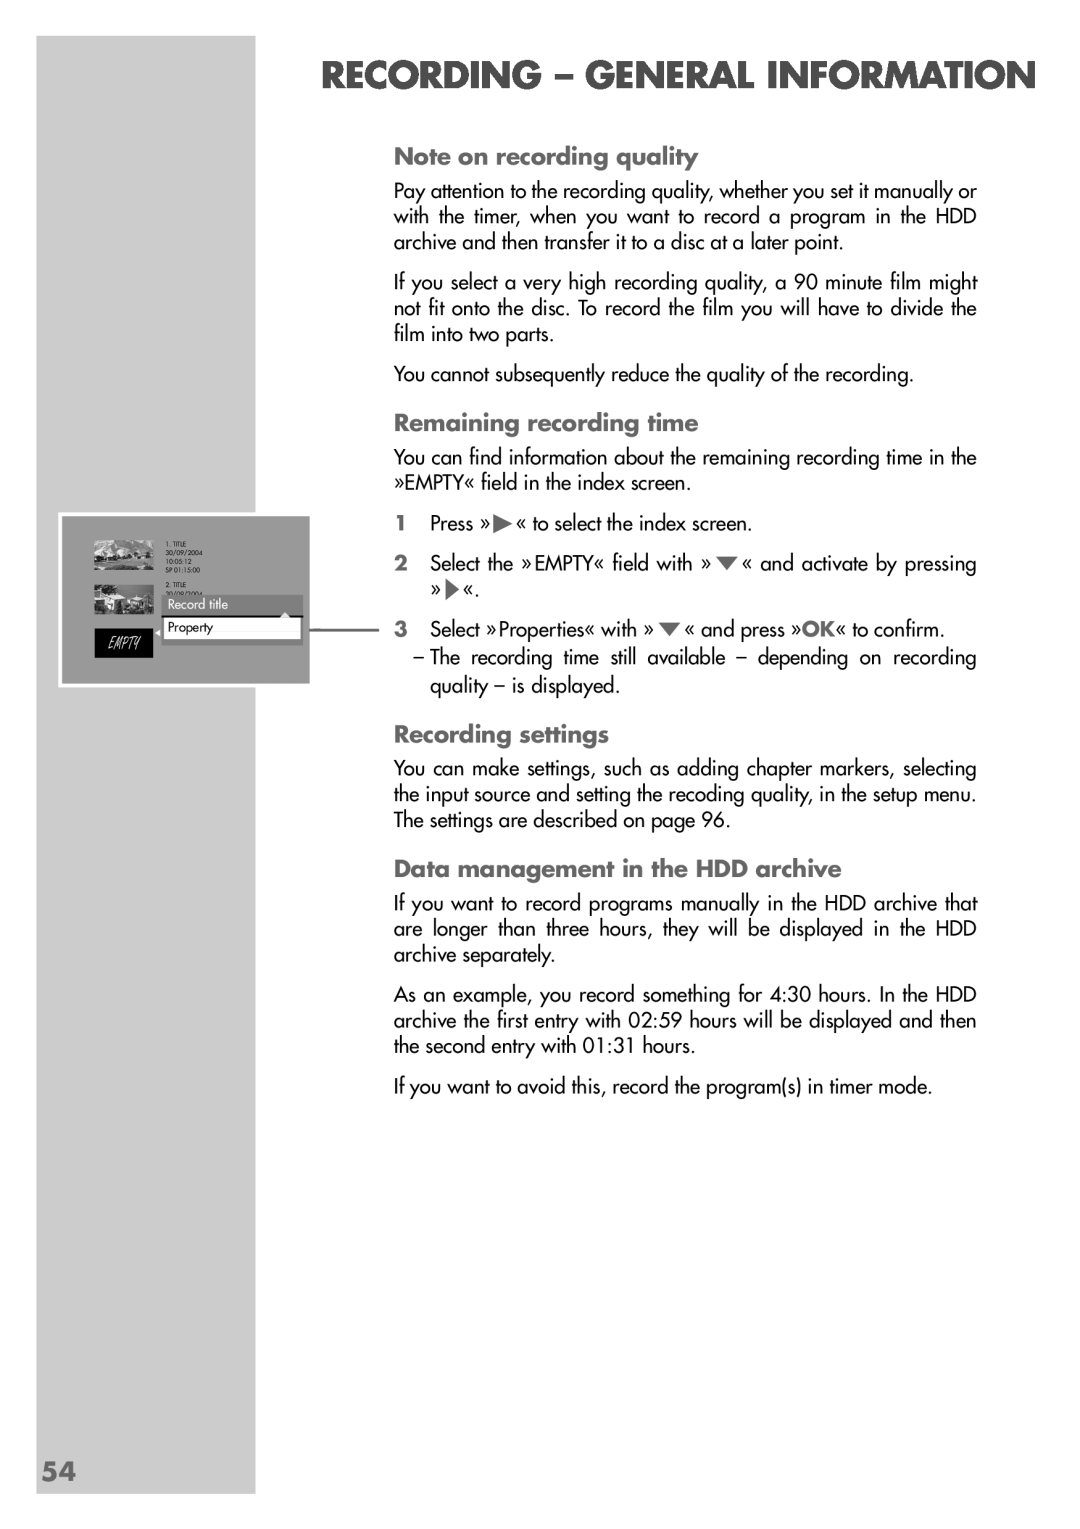 Grundig 5550 HDD Note on recording quality, Remaining recording time, Recording settings, Recording - General Information 